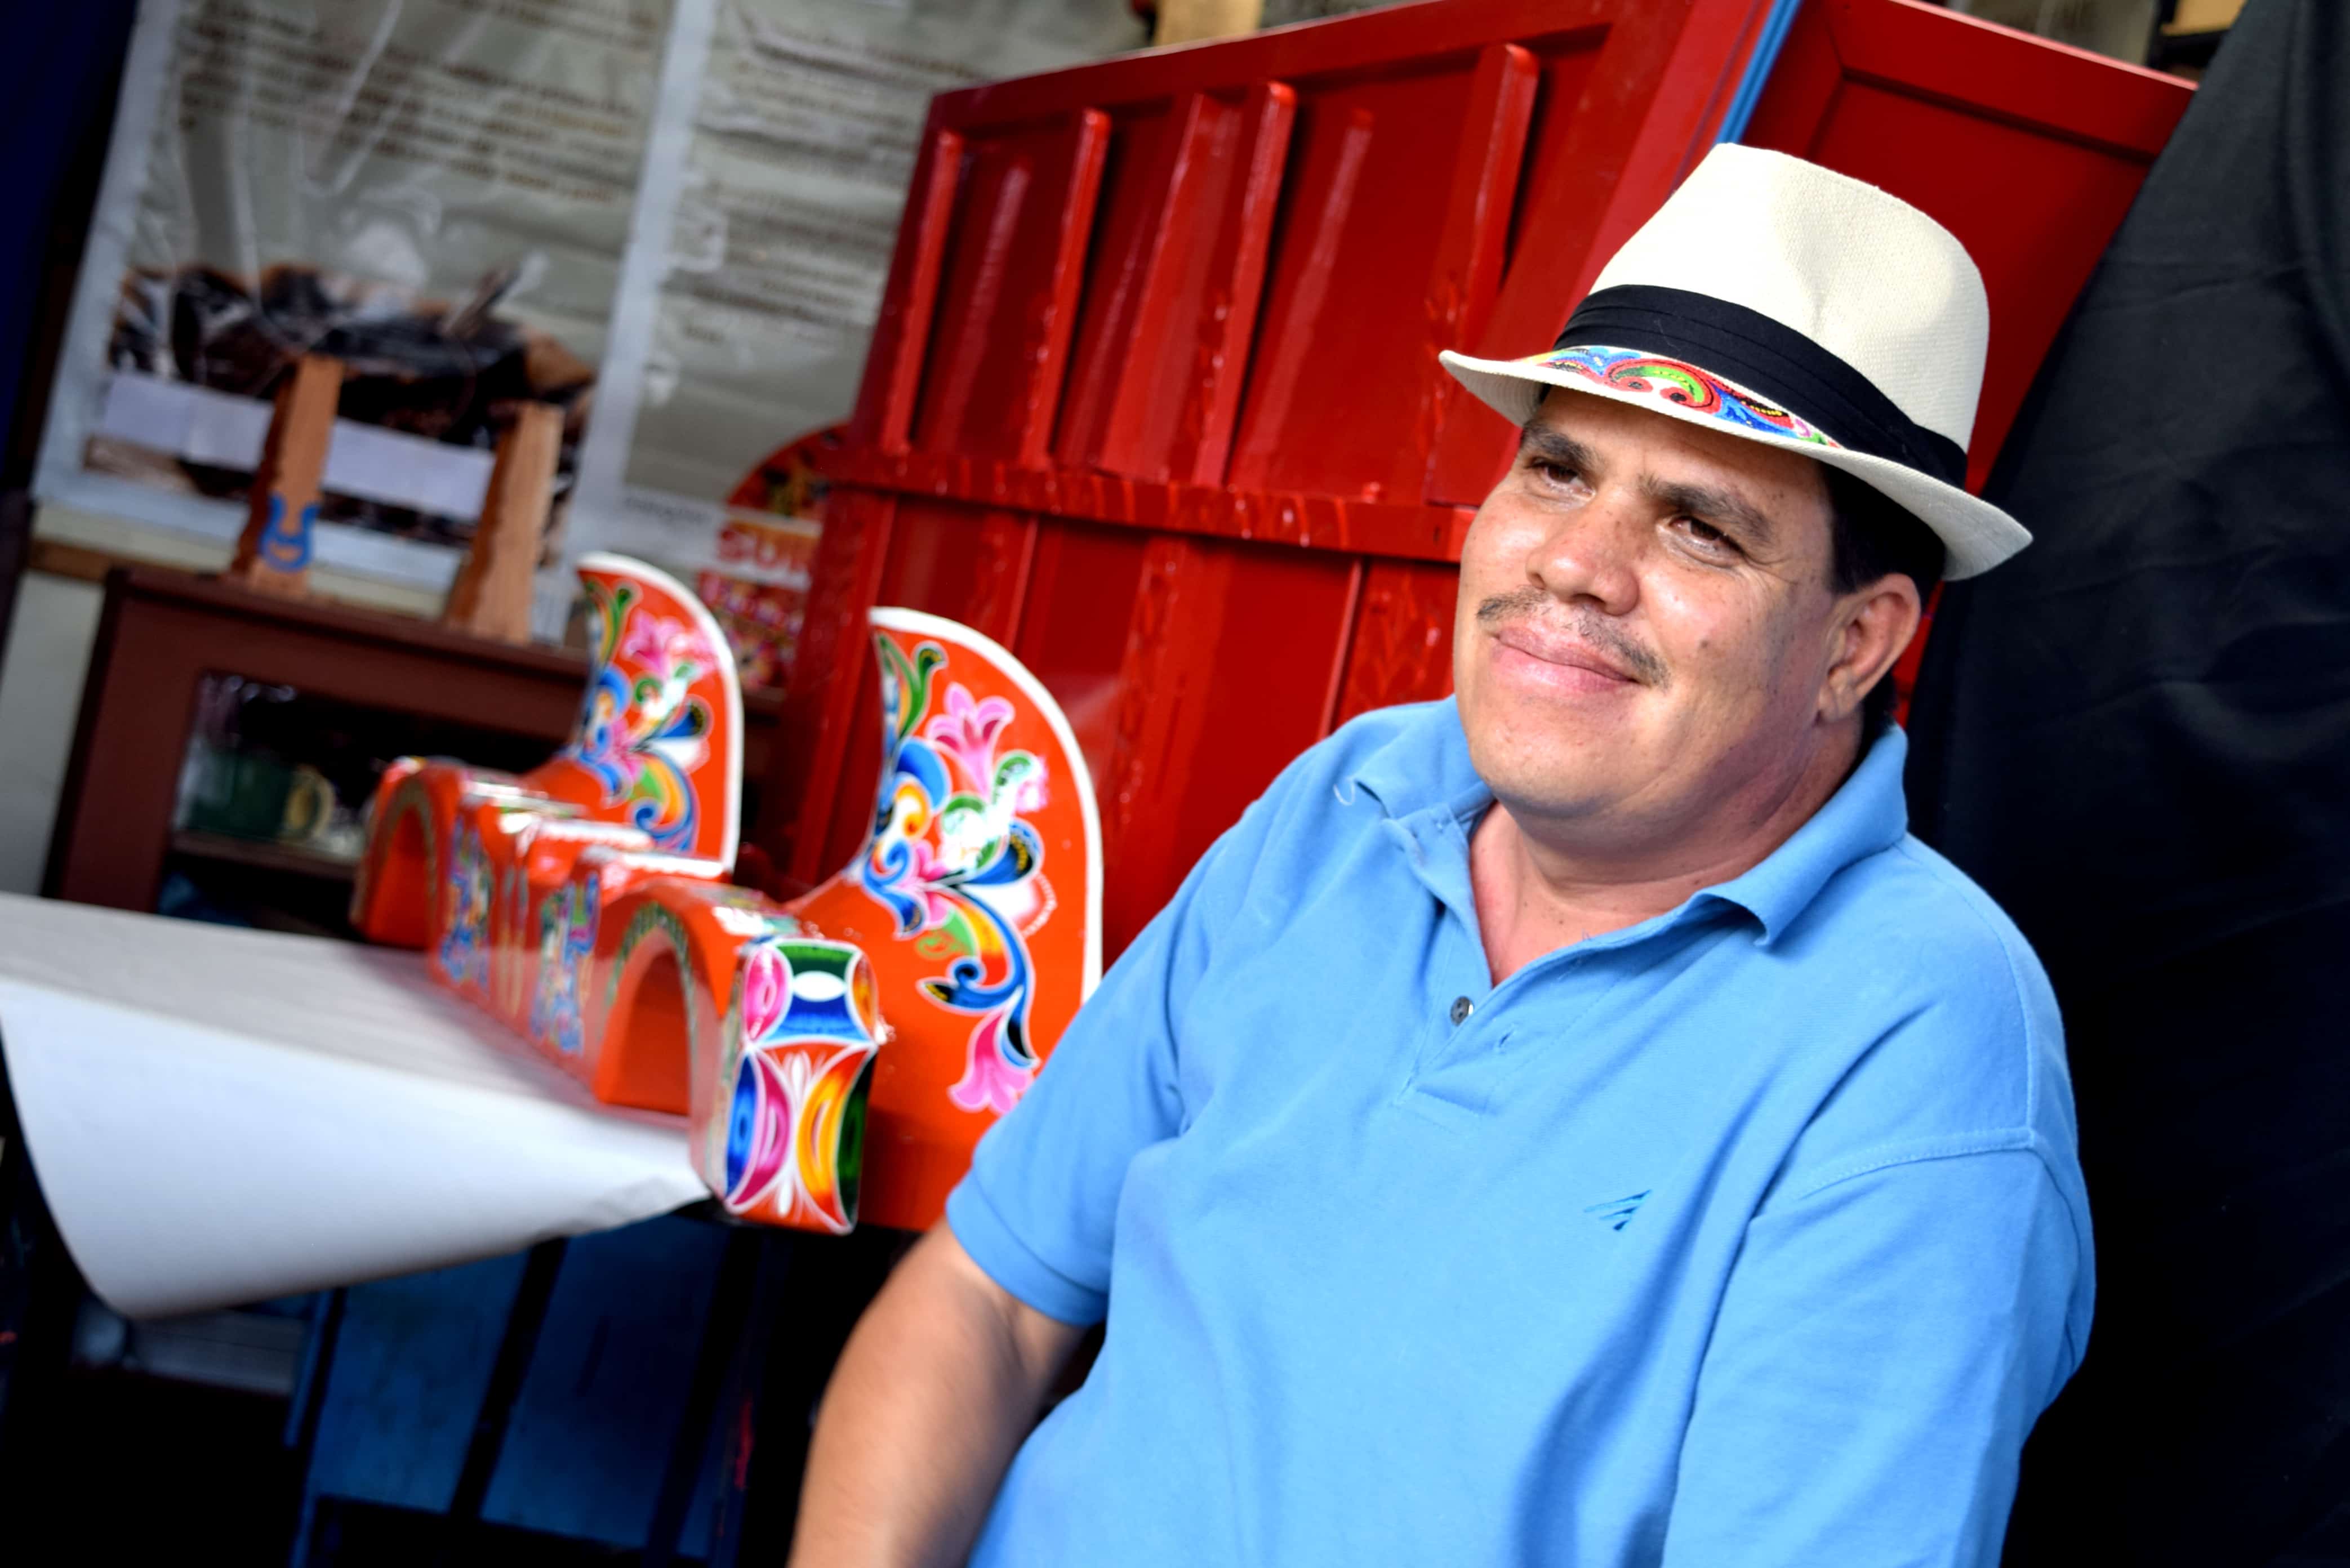 Luis Madrigal depicts the Costa Rican identity through the use of bright colors and shapes on the oxcarts.